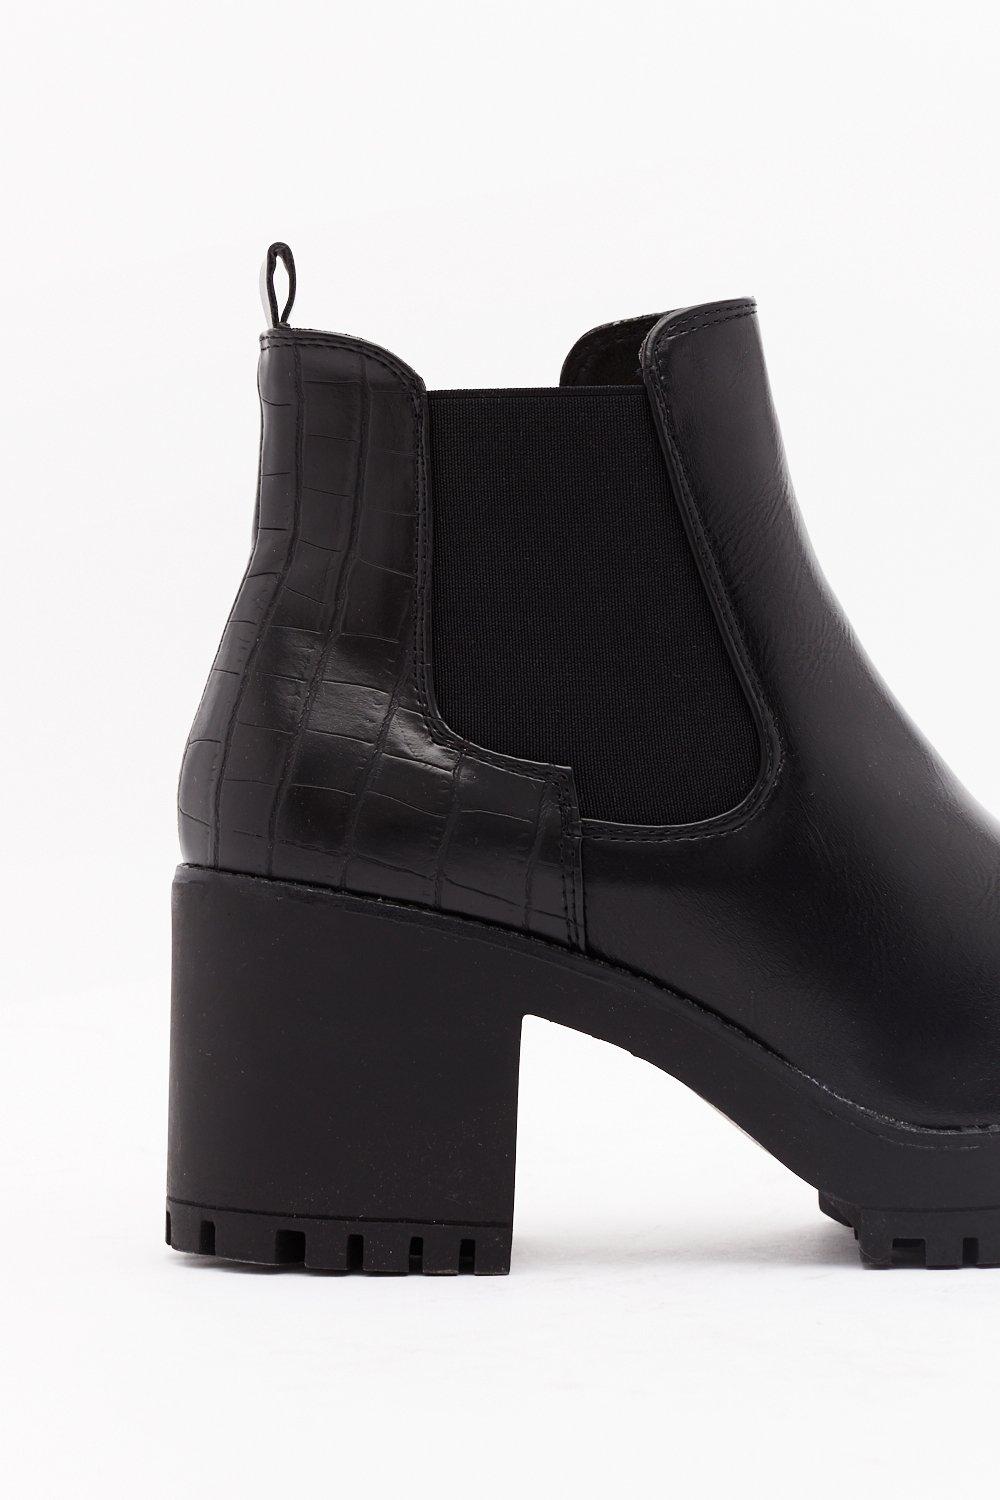 black faux leather chunky chelsea ankle boots